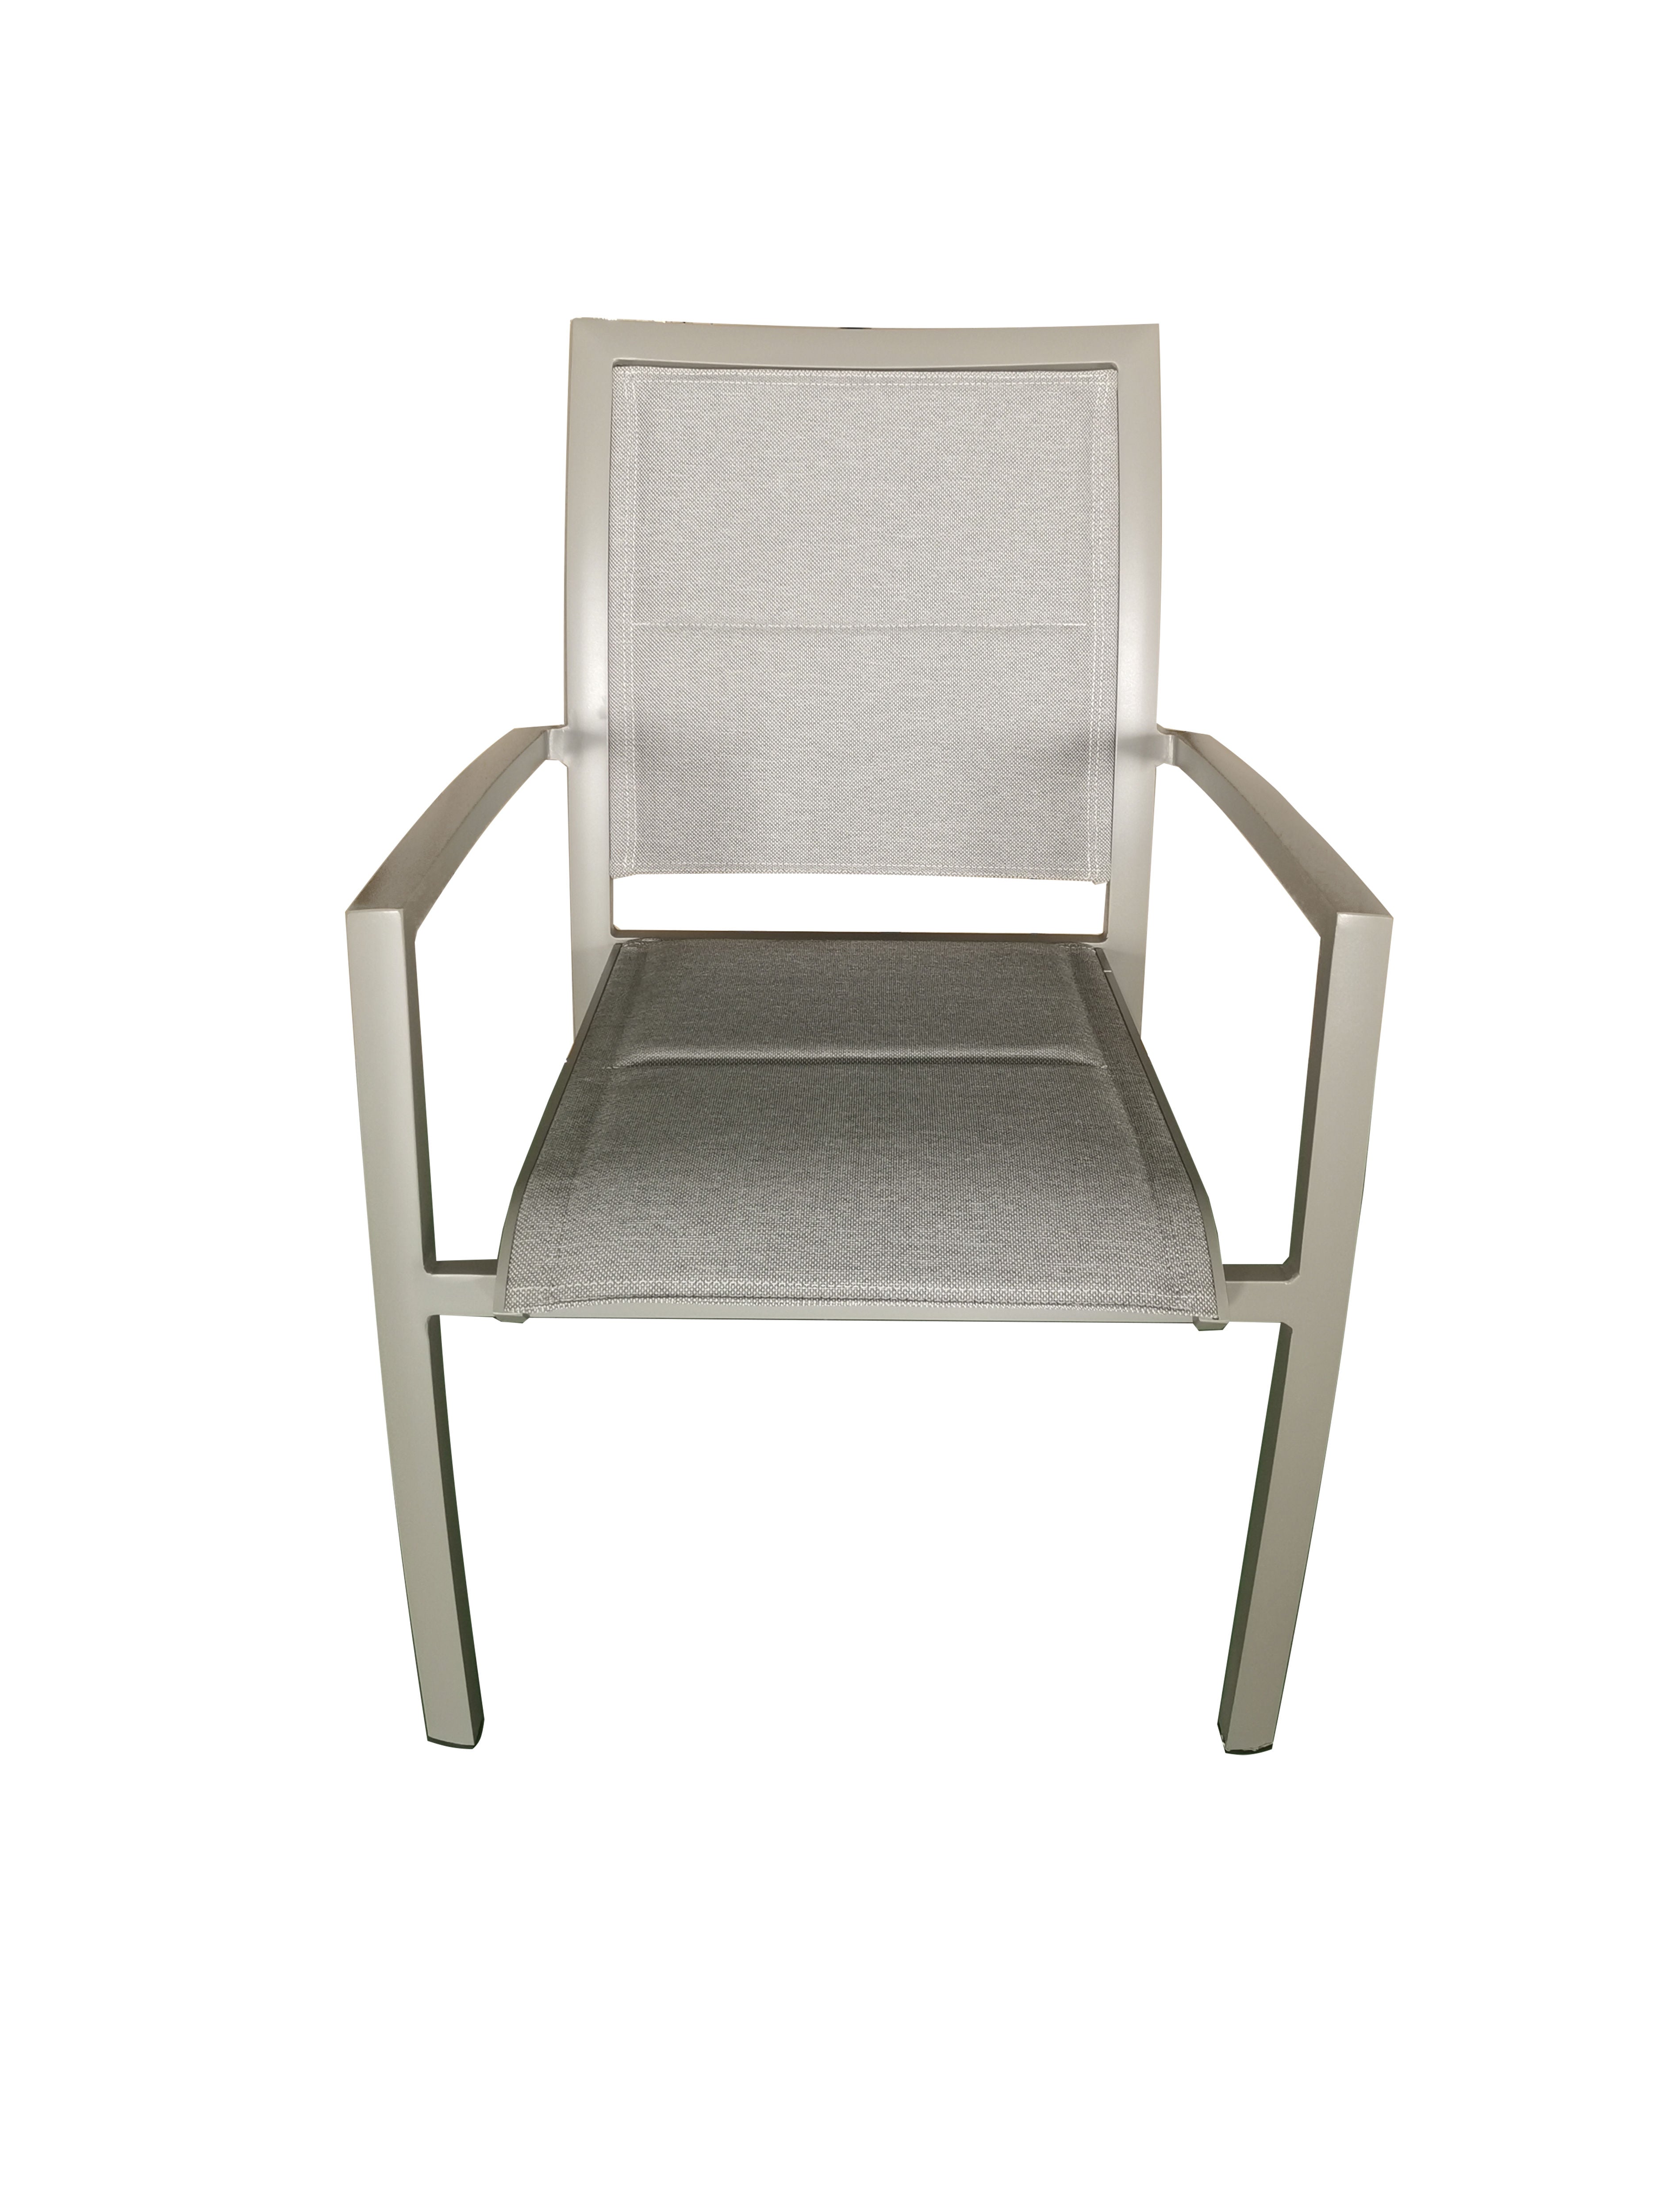 MOSS MOSS-T316TMA - Akumal Collection, Taupe matte aluminum stackable chair with quick dry padded taupe mix textilene seat 24" x 31" x H 36"